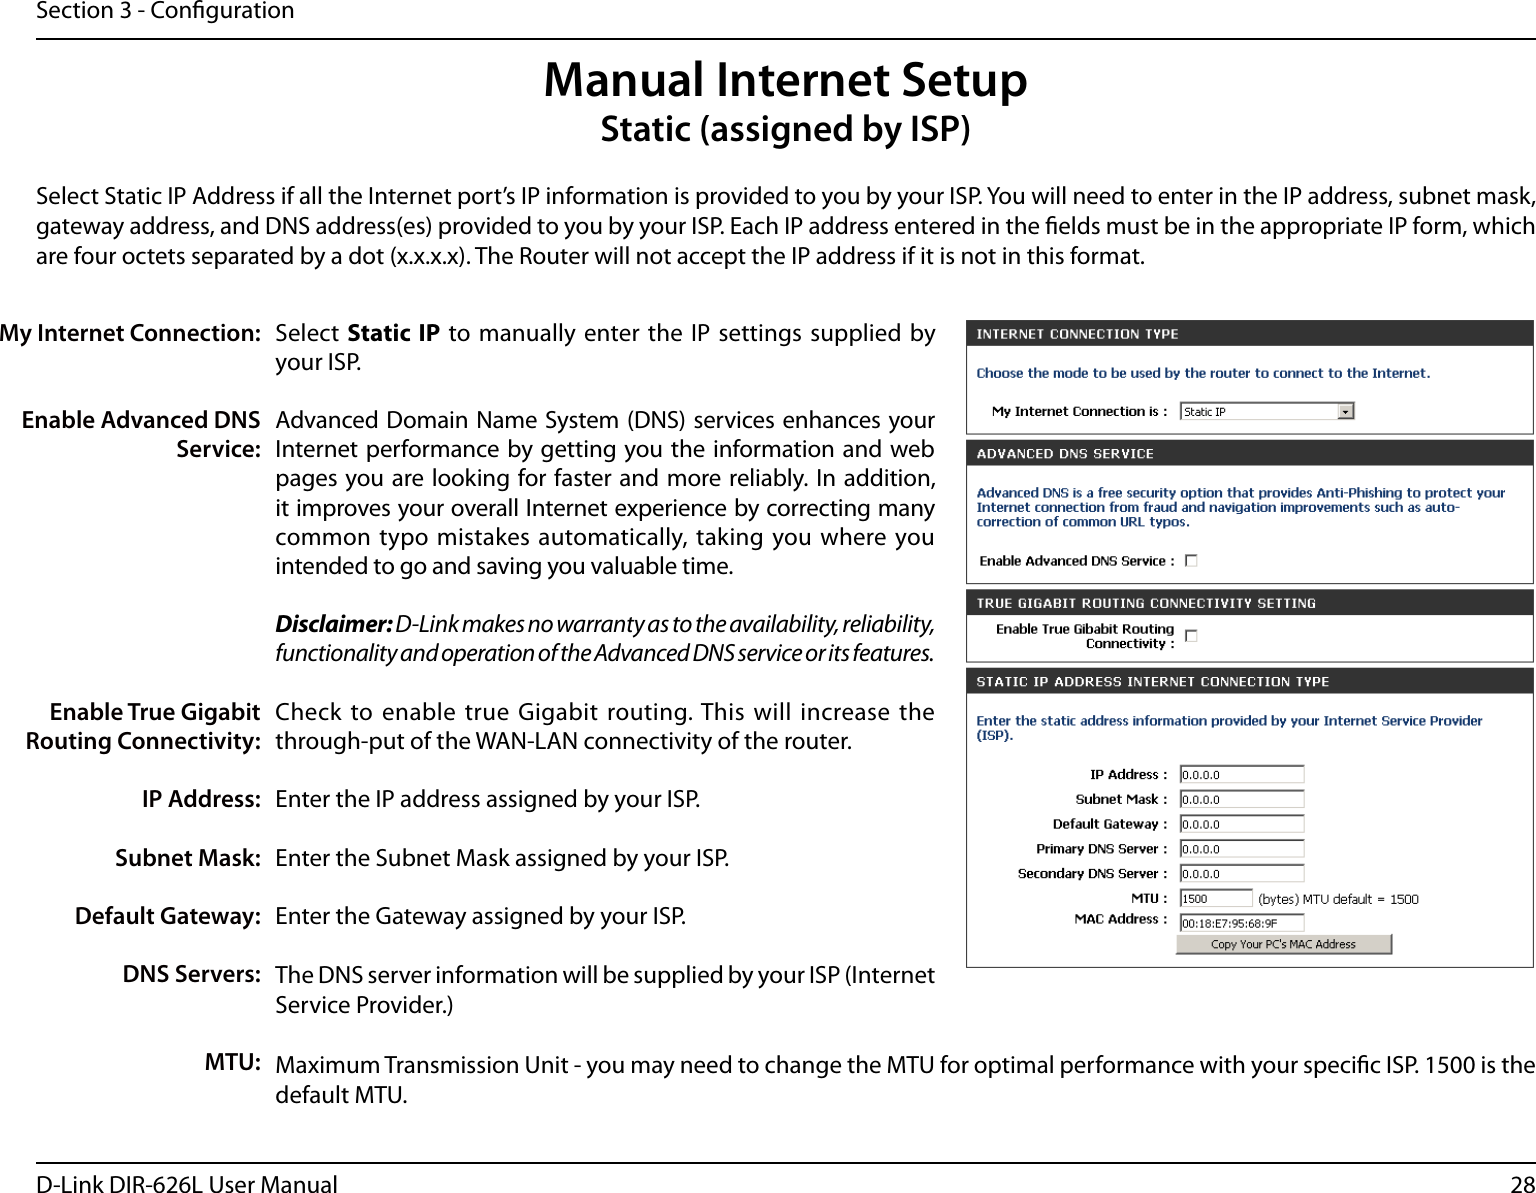 28D-Link DIR-626L User ManualSection 3 - CongurationSelect  Static IP to  manually enter the IP  settings supplied by your ISP.Advanced Domain Name System (DNS) services enhances your Internet performance by getting you the information and web pages you are looking for faster and more reliably. In addition, it improves your overall Internet experience by correcting many common typo  mistakes automatically,  taking you where you intended to go and saving you valuable time.Disclaimer: D-Link makes no warranty as to the availability, reliability, functionality and operation of the Advanced DNS service or its features.Check to enable true Gigabit routing. This will increase the through-put of the WAN-LAN connectivity of the router.Enter the IP address assigned by your ISP.Enter the Subnet Mask assigned by your ISP.Enter the Gateway assigned by your ISP.The DNS server information will be supplied by your ISP (Internet Service Provider.)Maximum Transmission Unit - you may need to change the MTU for optimal performance with your specic ISP. 1500 is the default MTU.My Internet Connection:Enable Advanced DNS Service:Enable True Gigabit Routing Connectivity:IP Address:Subnet Mask:Default Gateway:DNS Servers:MTU:Manual Internet SetupStatic (assigned by ISP)Select Static IP Address if all the Internet port’s IP information is provided to you by your ISP. You will need to enter in the IP address, subnet mask, gateway address, and DNS address(es) provided to you by your ISP. Each IP address entered in the elds must be in the appropriate IP form, which are four octets separated by a dot (x.x.x.x). The Router will not accept the IP address if it is not in this format.